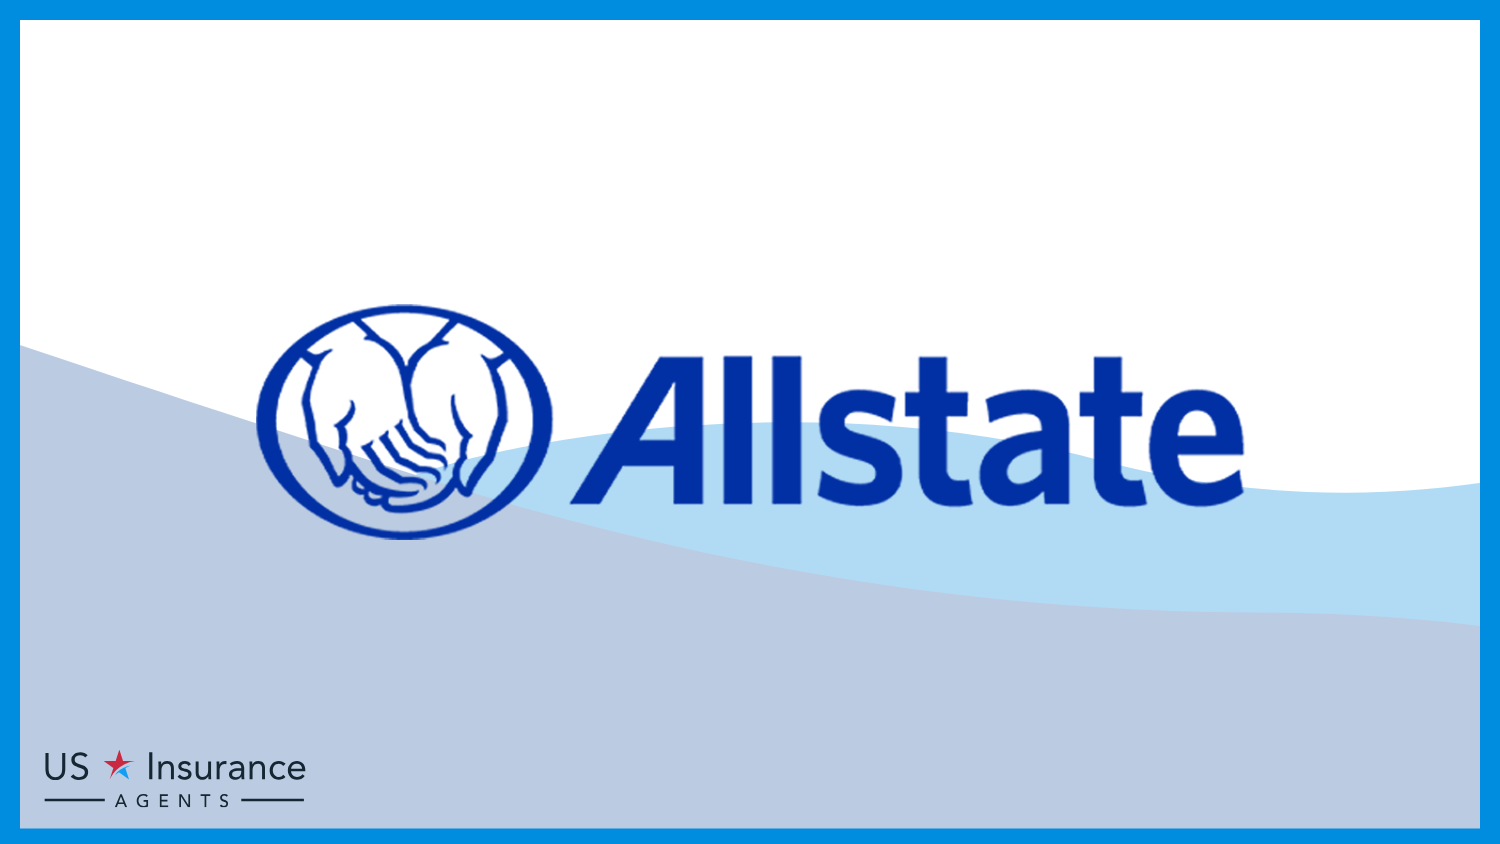 Allstate: Best Business Insurance for Health Insurance Companies